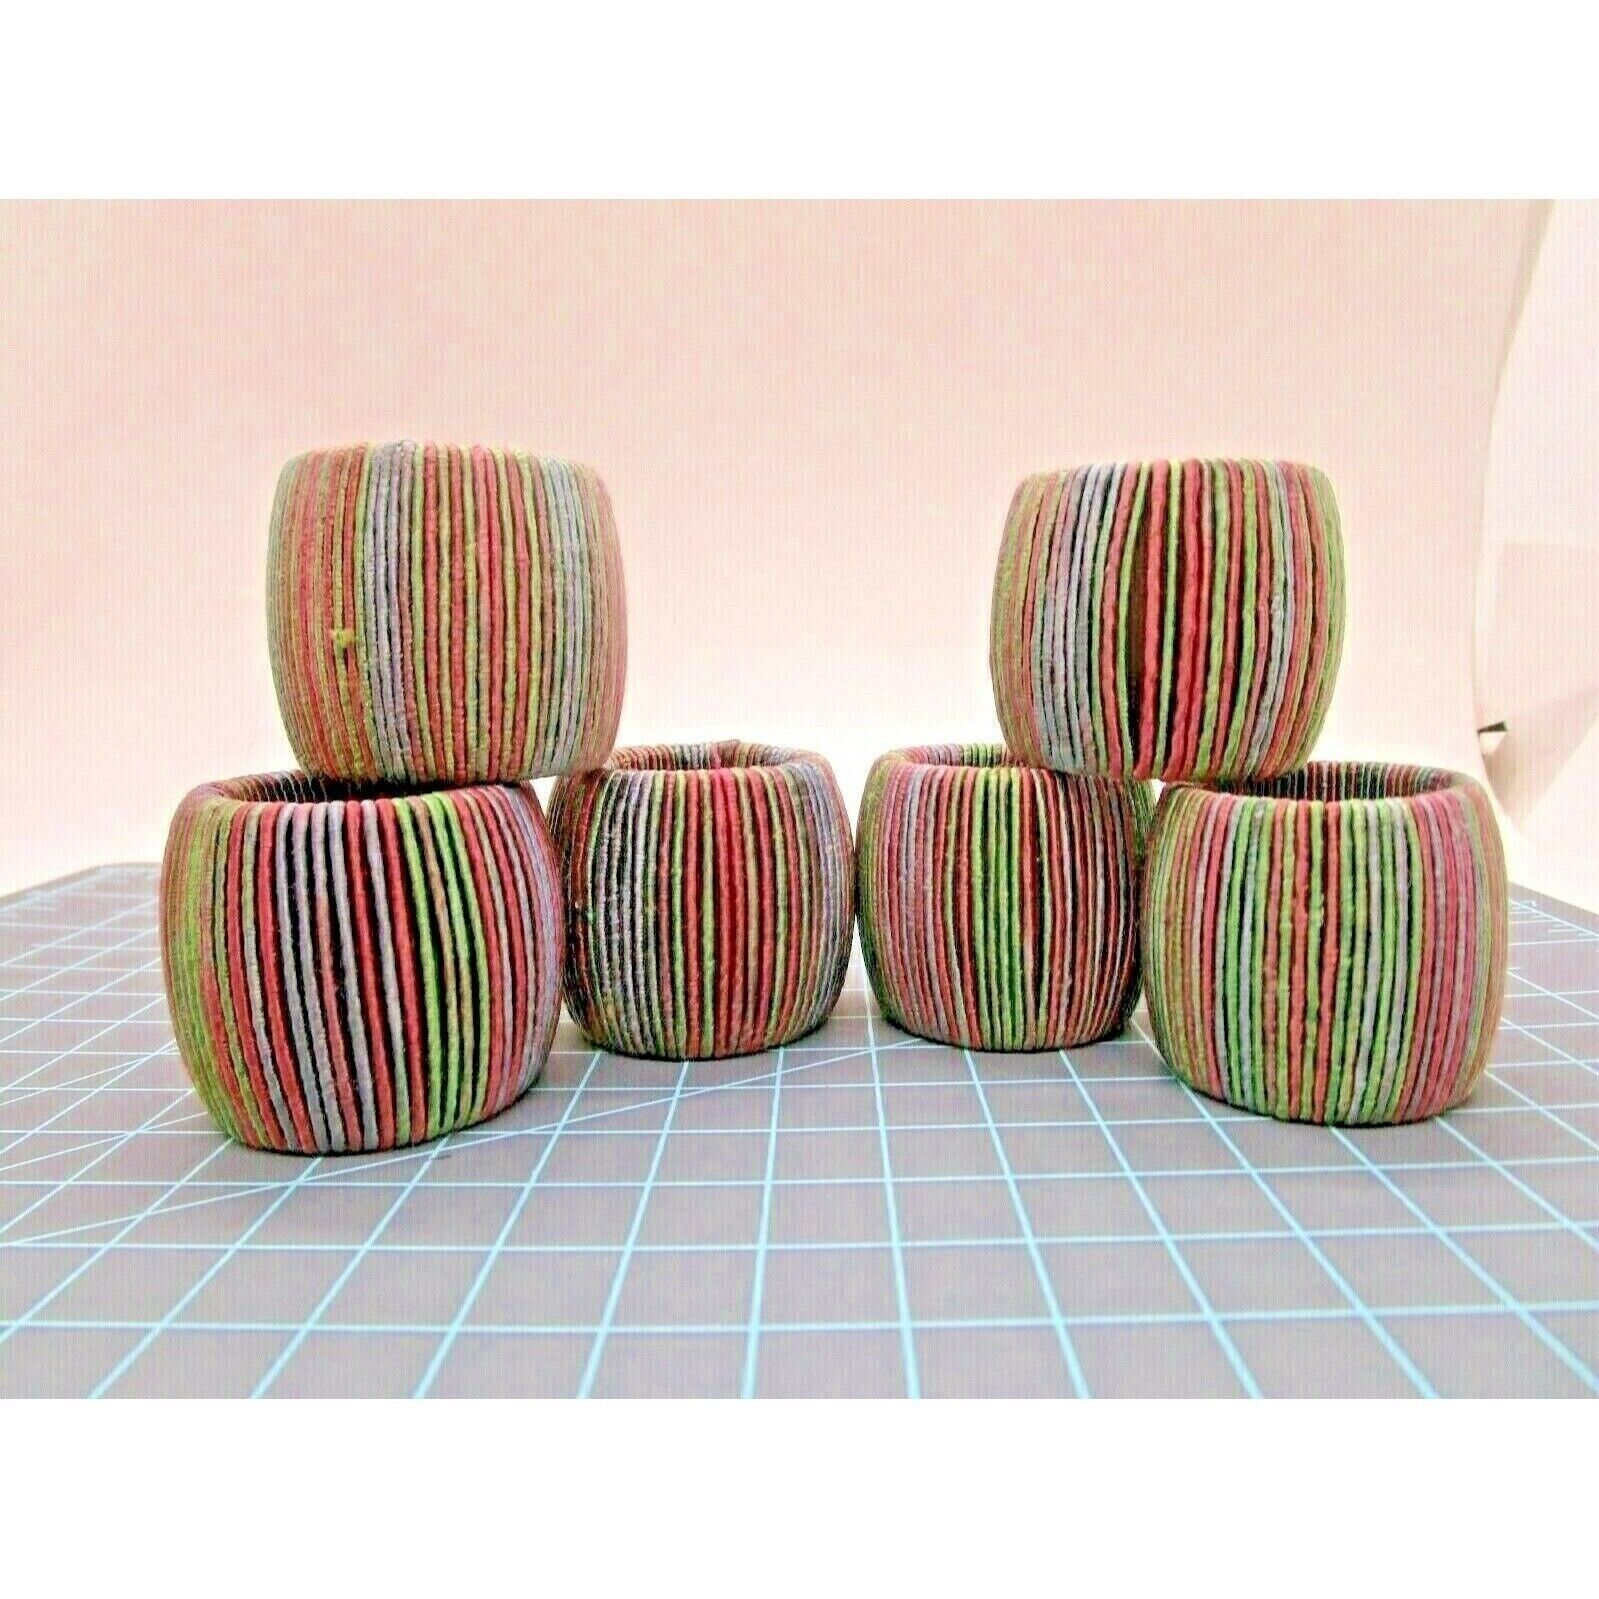 Woven Wrapped Round Napkin Rings Set of 6 Made in India